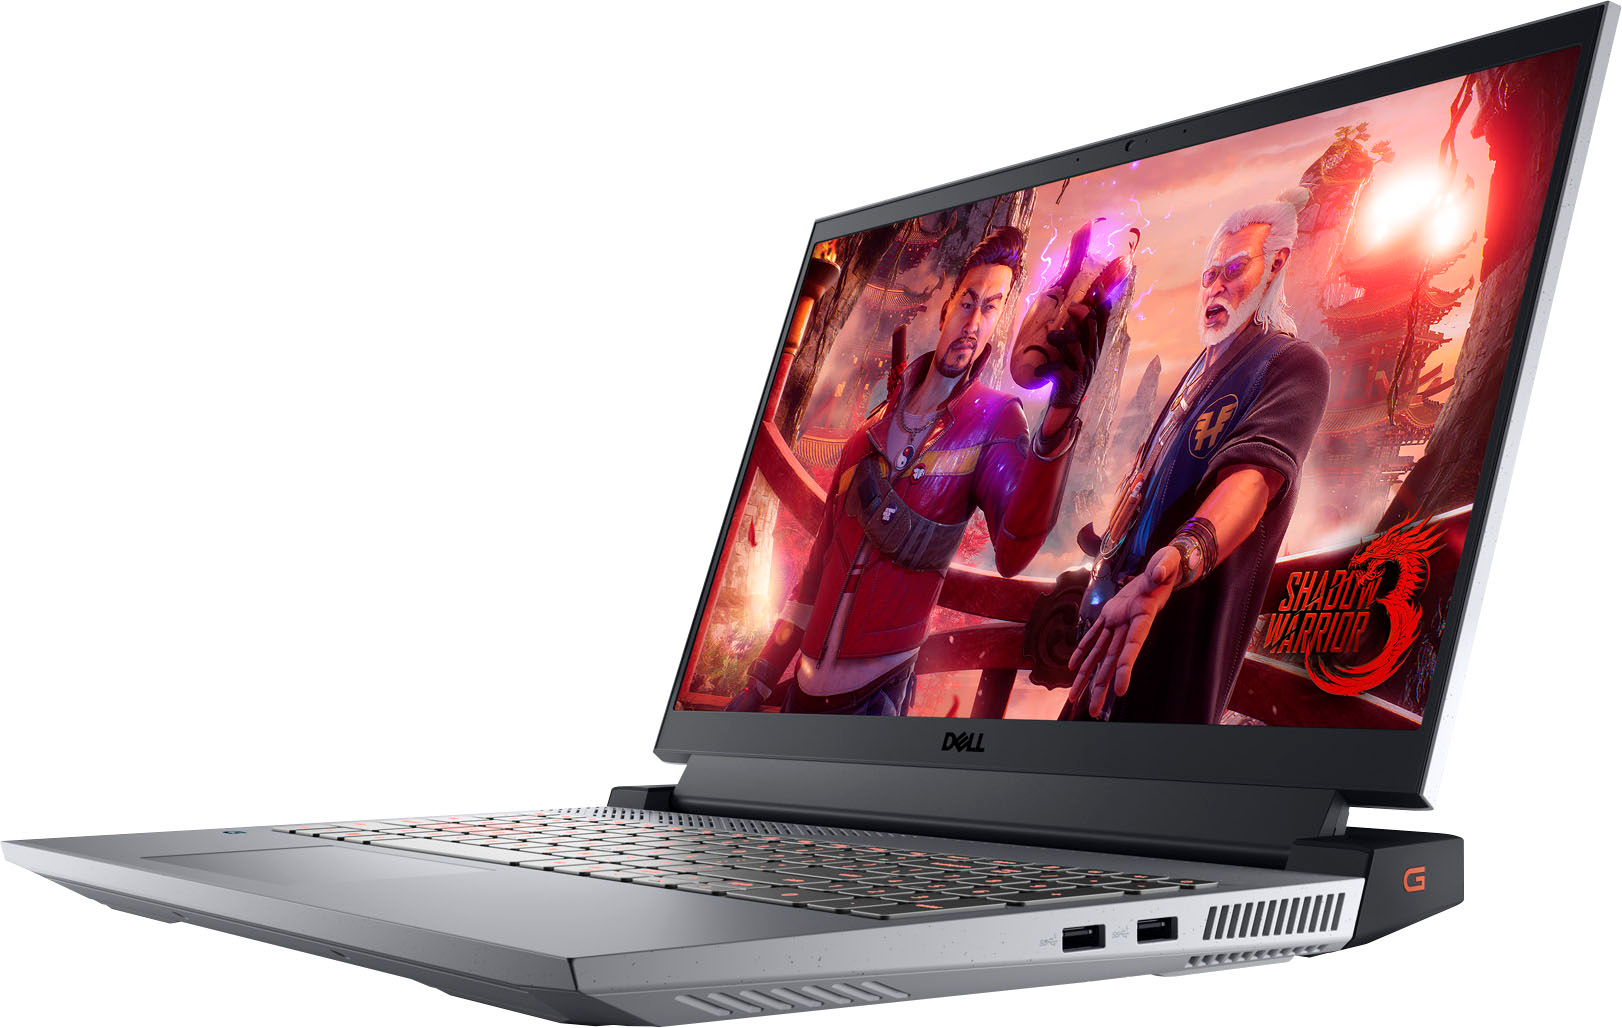 Zoom in on Angle Zoom. Dell G15 15.6" FHD 120Hz Gaming Laptop - AMD Ryzen 5 - 8GB Memory - NVIDIA GeForce RTX 3050 - 512GB SSD - Phantom Grey with speckles.